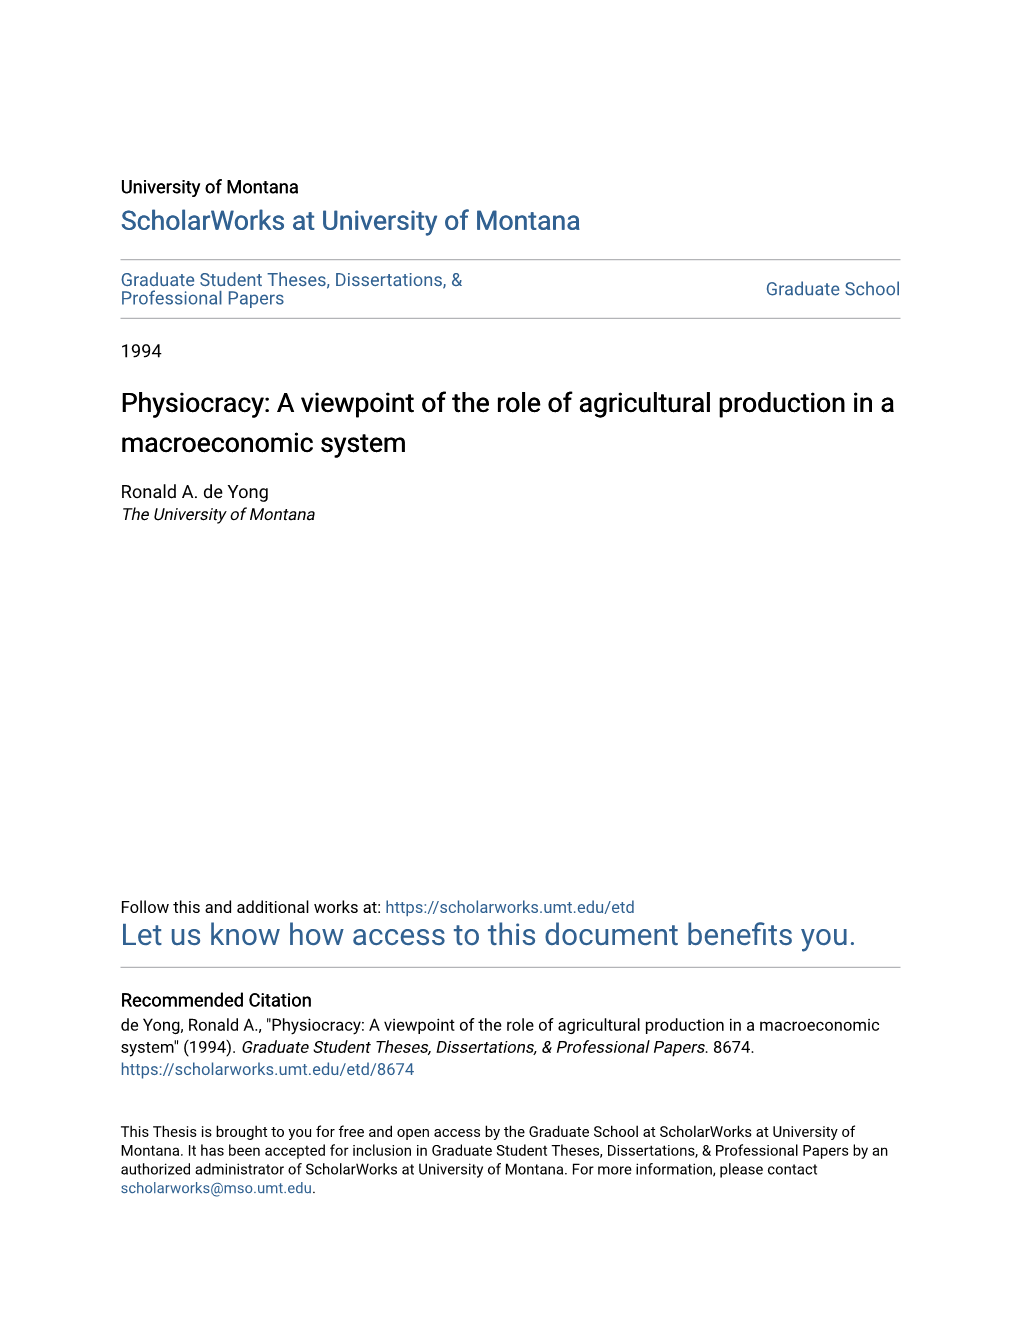 Physiocracy: a Viewpoint of the Role of Agricultural Production in a Macroeconomic System